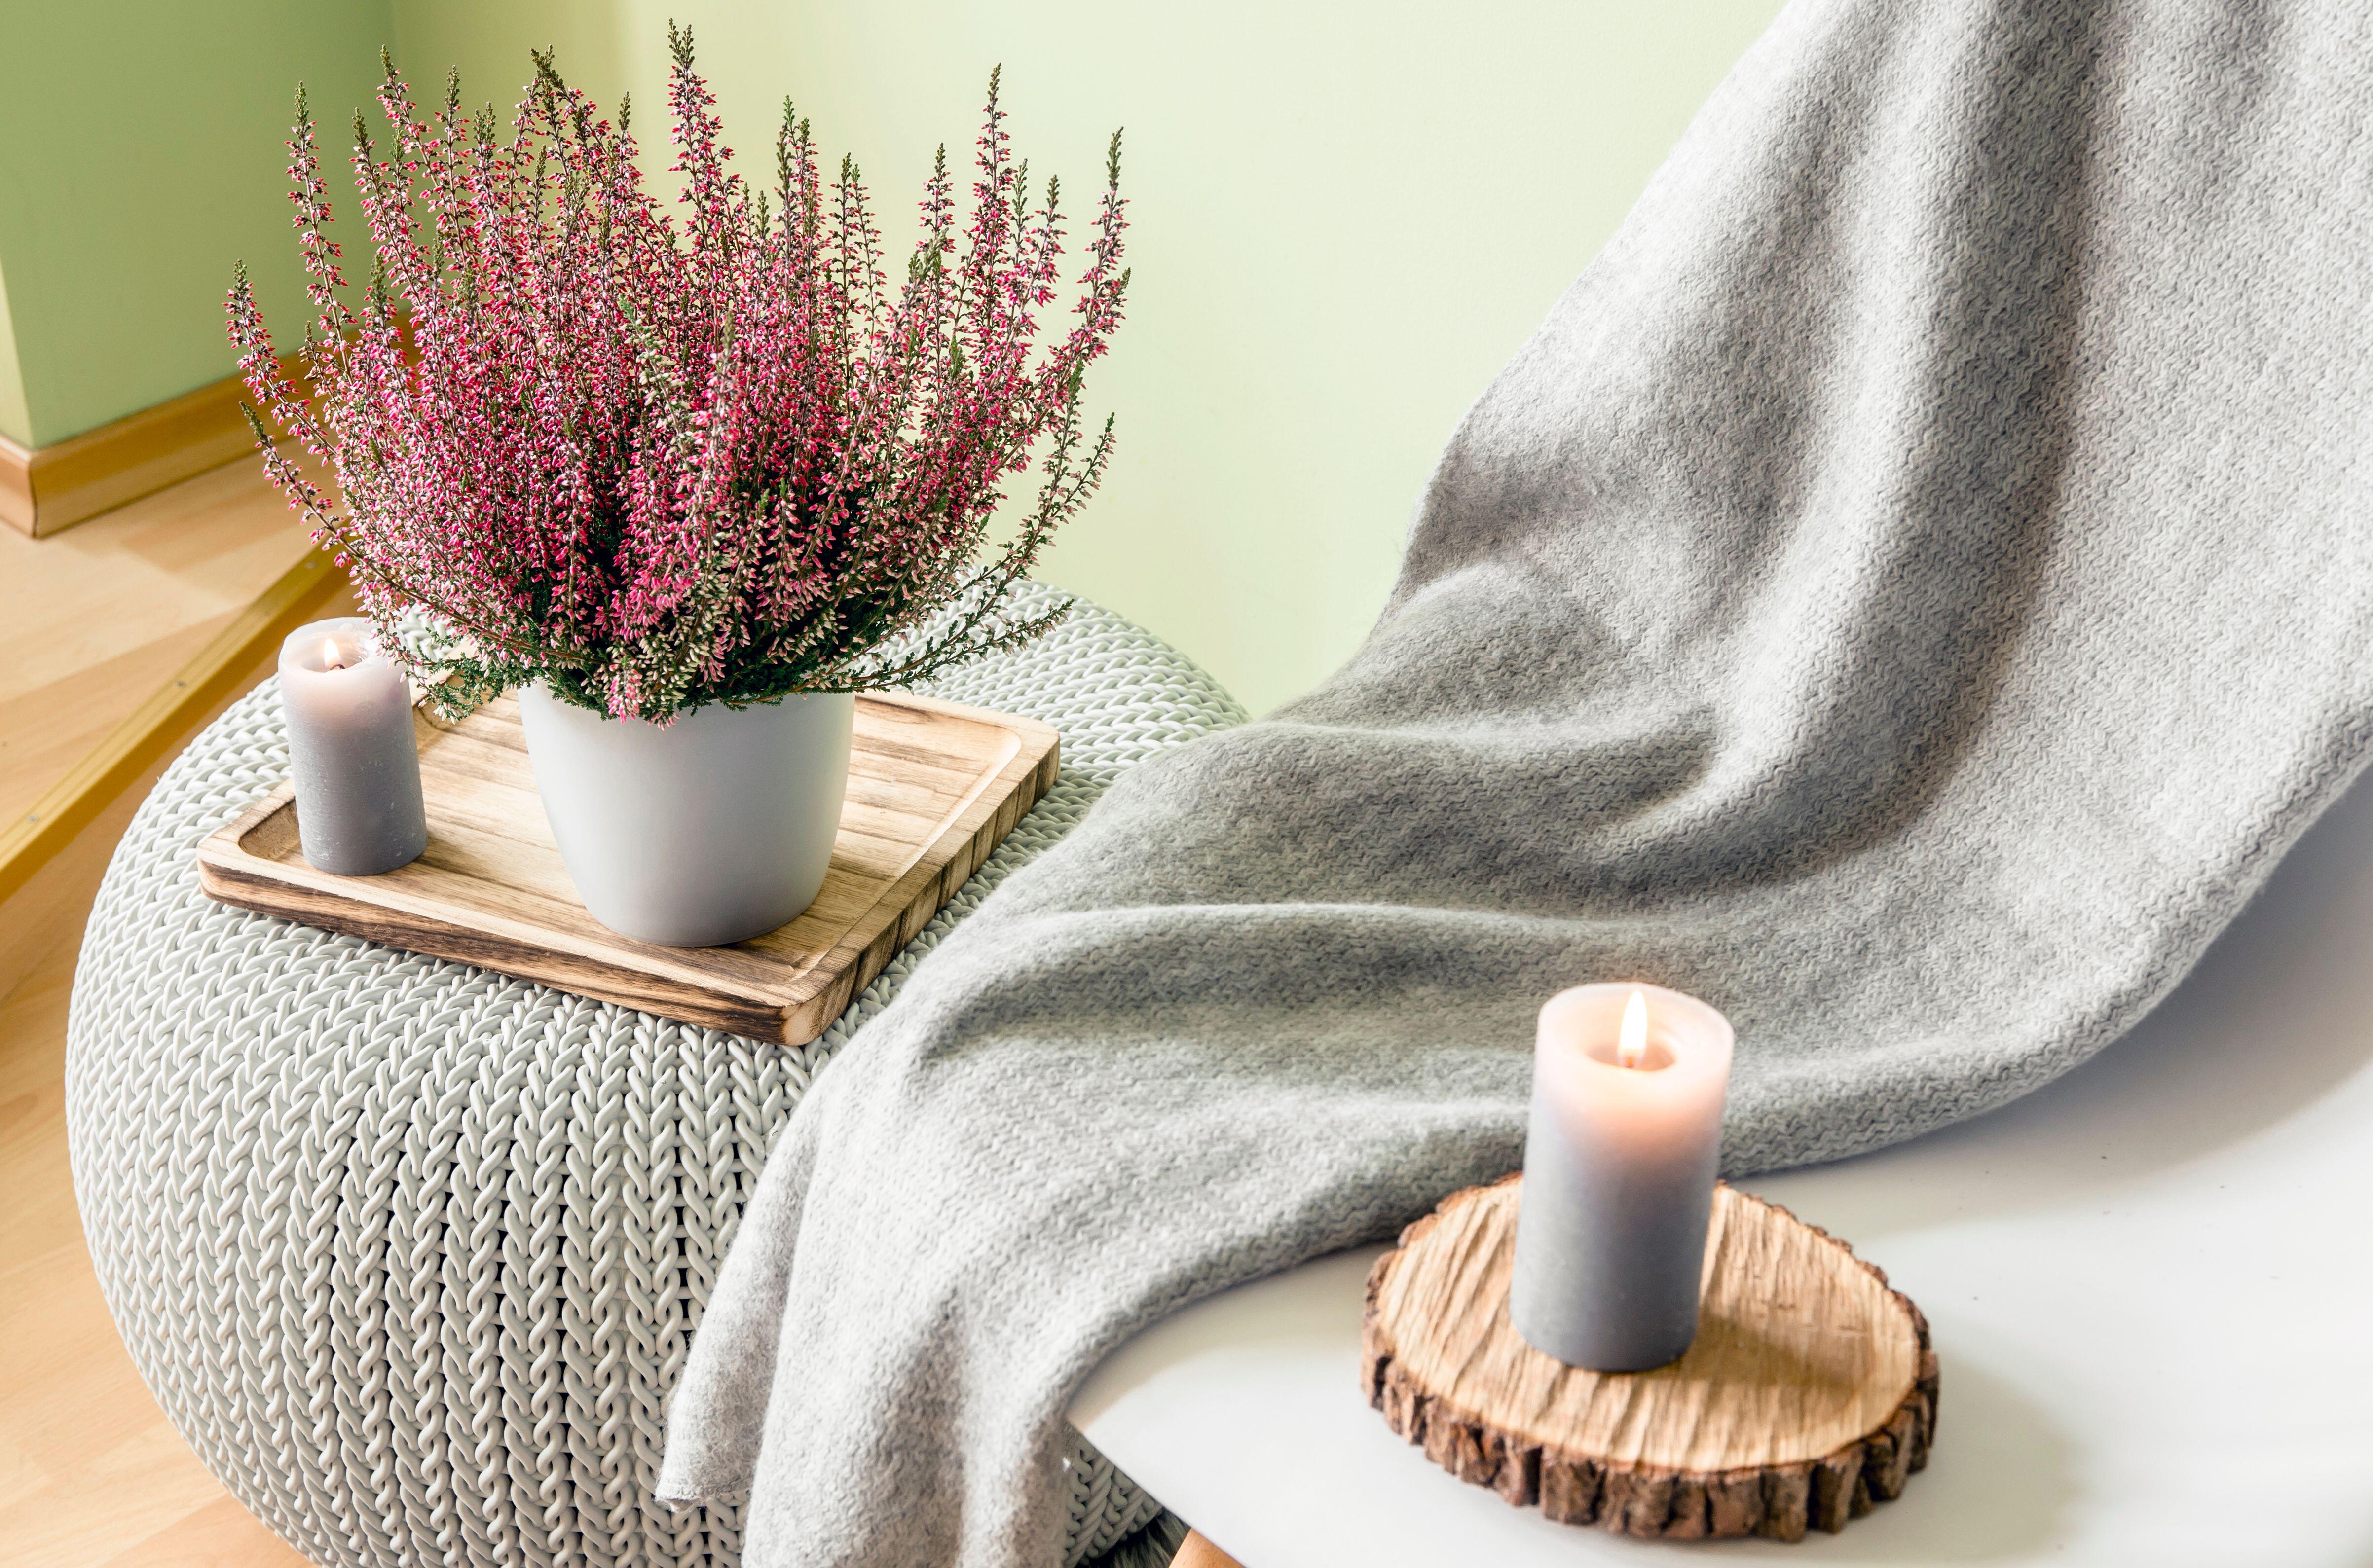 Candles near a blanket and plant